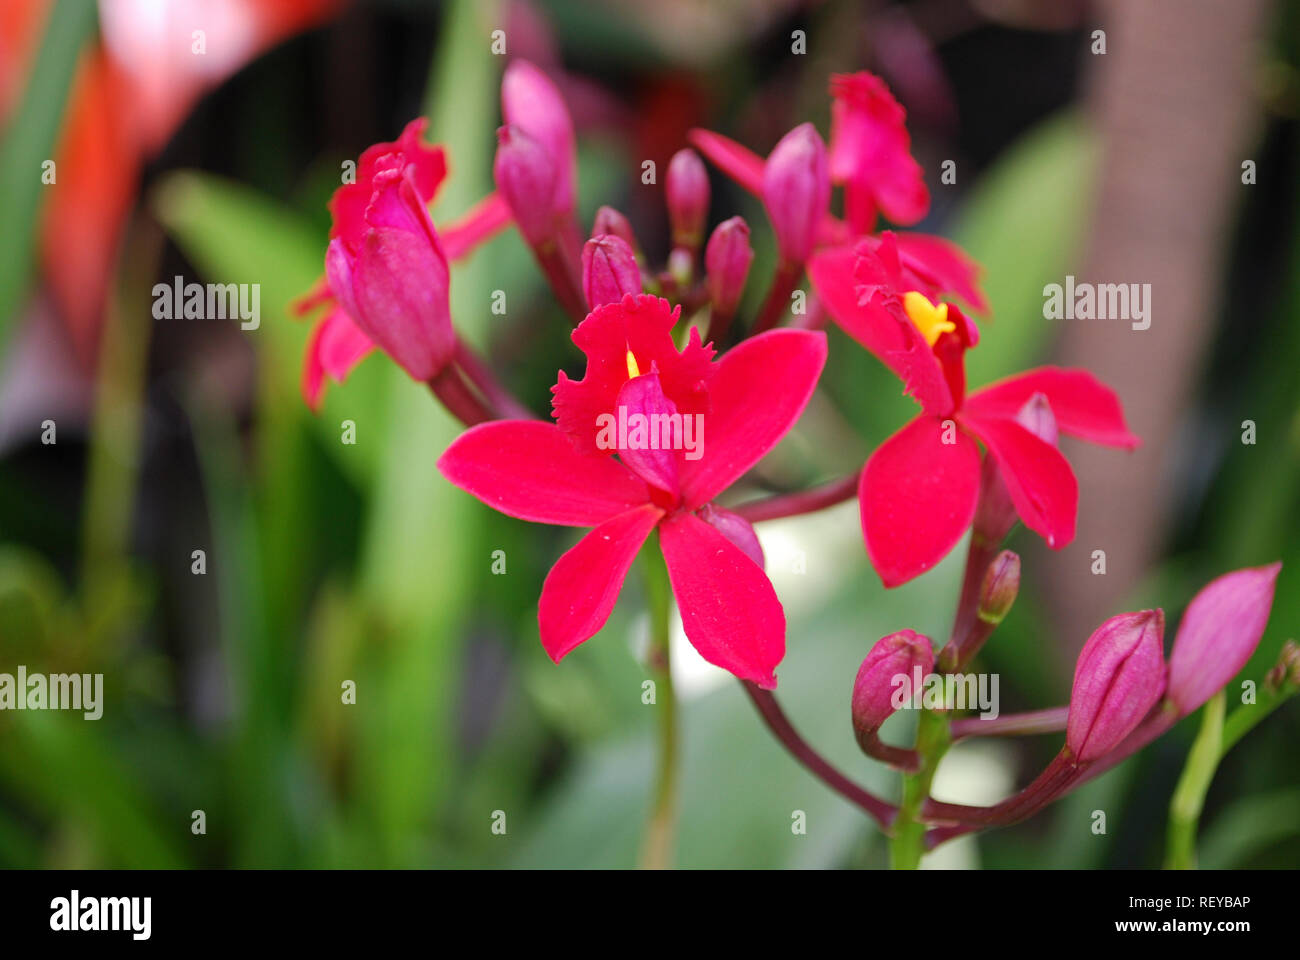 Orchid Epidendrum Hokulea 'Super Red' flowers. Decorative plants for gardening and greenhouse. Stock Photo